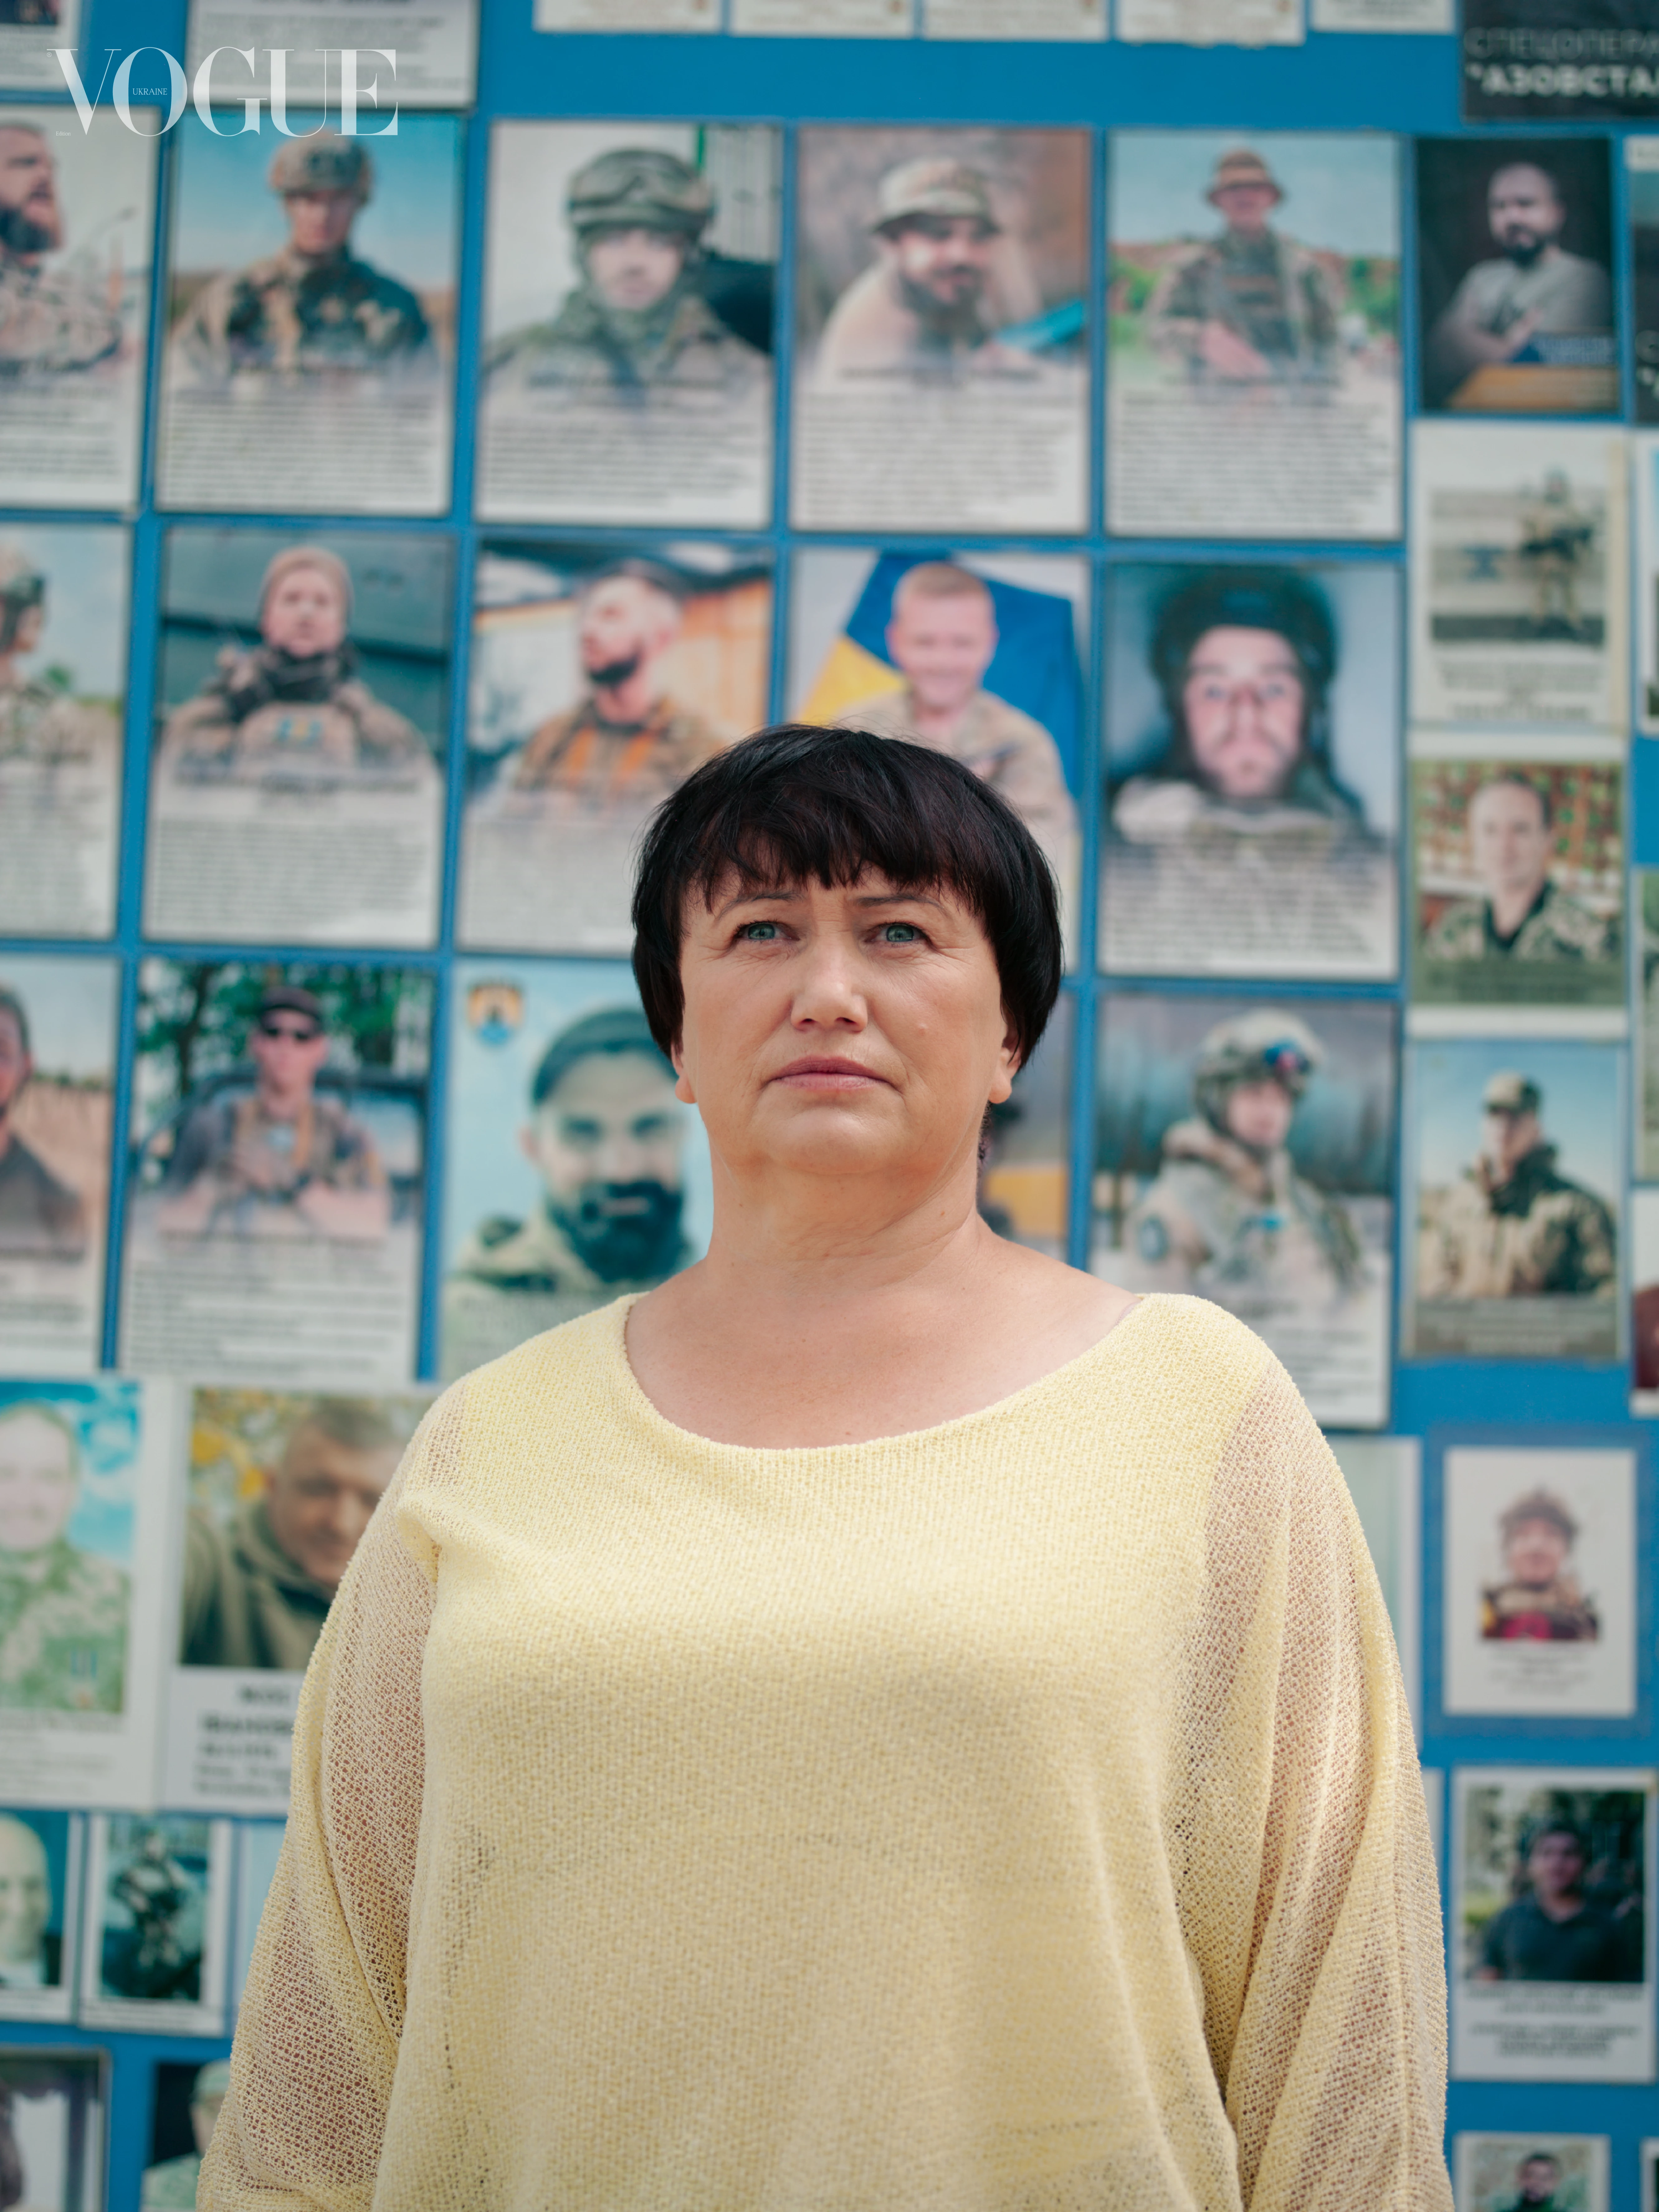 Tetiana Demchuk in Kyiv, near the Wall of Remembrance of the Fallen for Ukraine